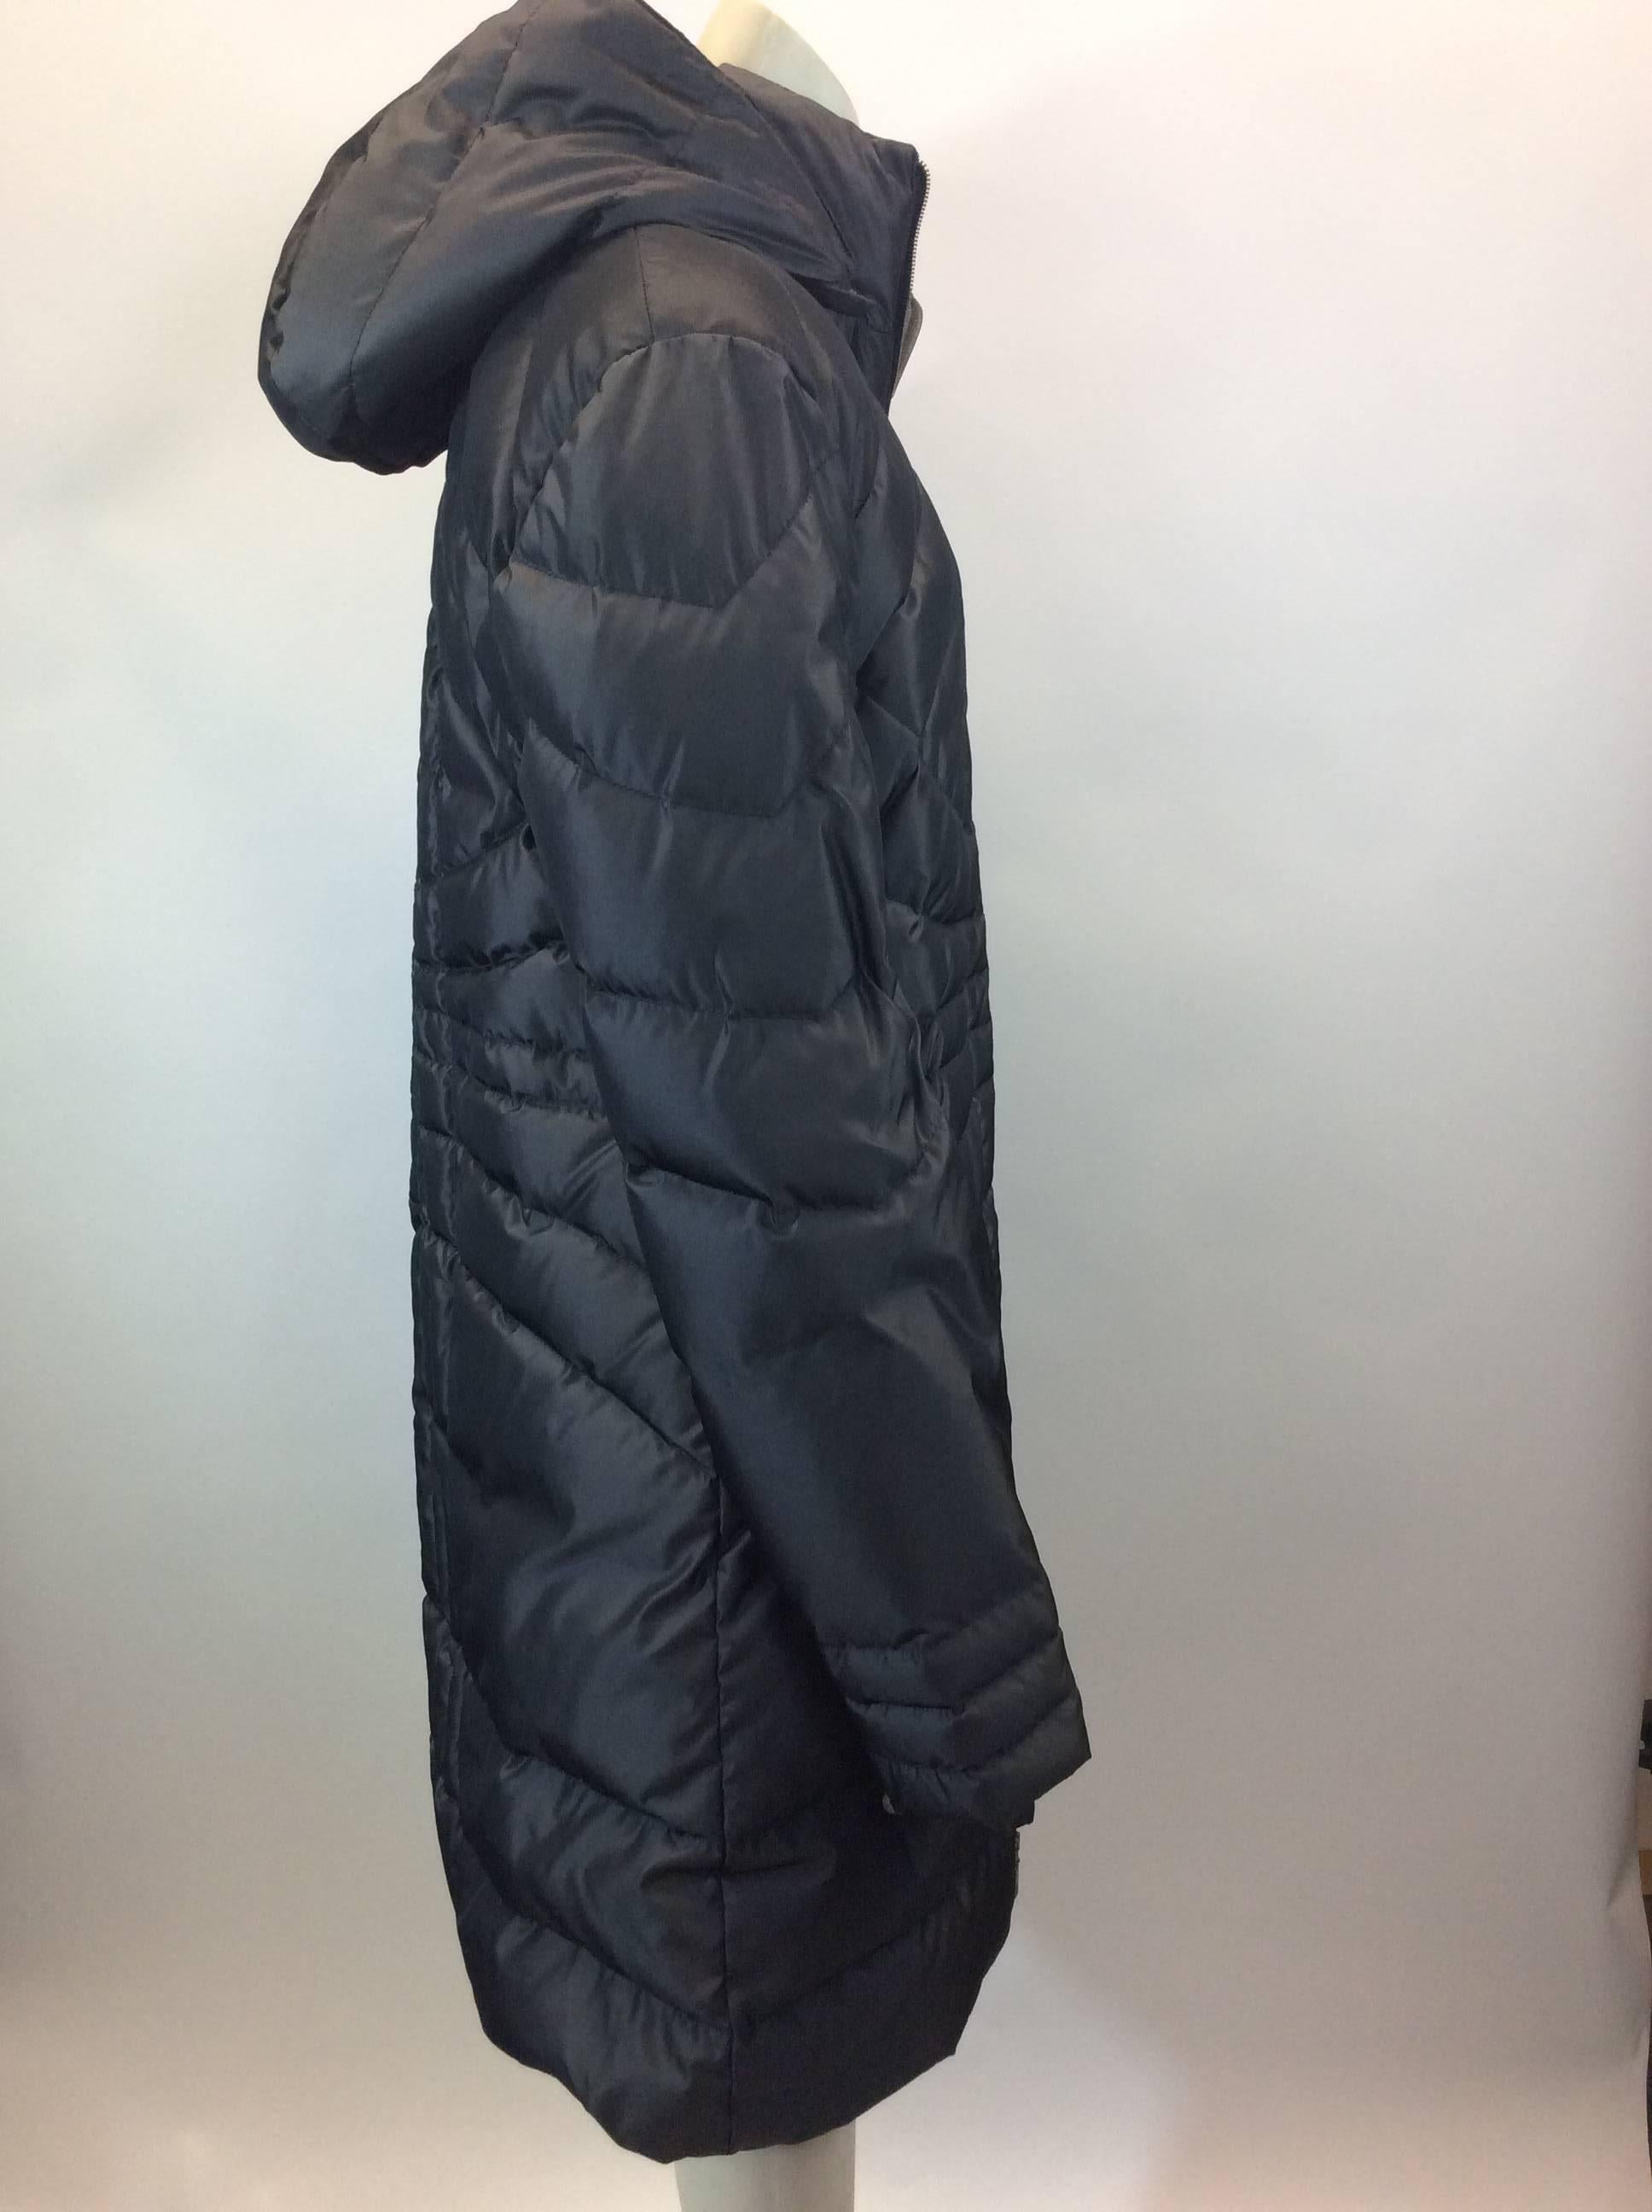 Moncler Grey Nylon Coat In Excellent Condition For Sale In Narberth, PA